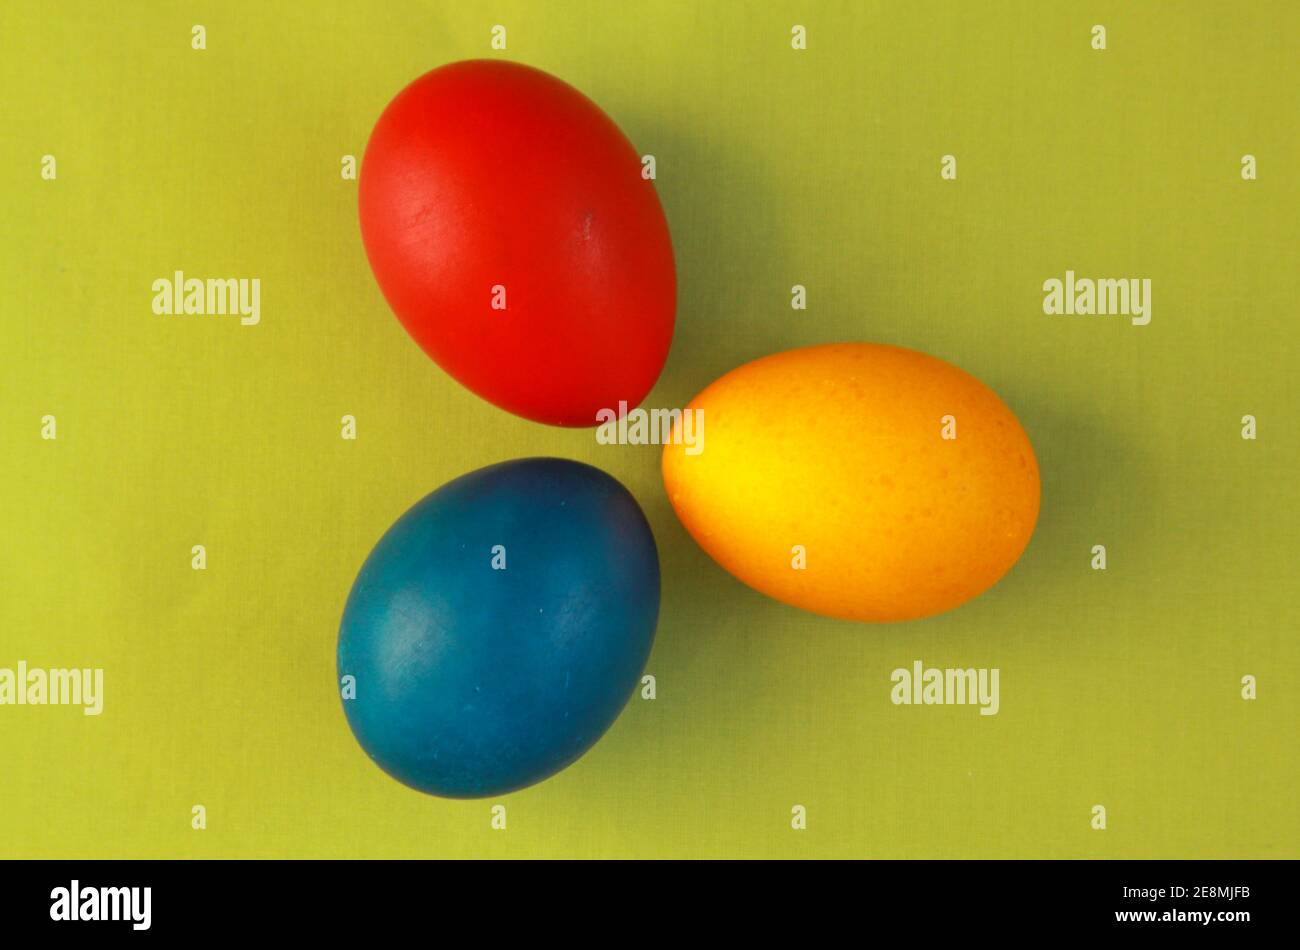 Round red, yellow and blue colored Easter eggs on vivid green background 2020 concept. Painting eggs is a Christian tradition during Easter holiday al Stock Photo